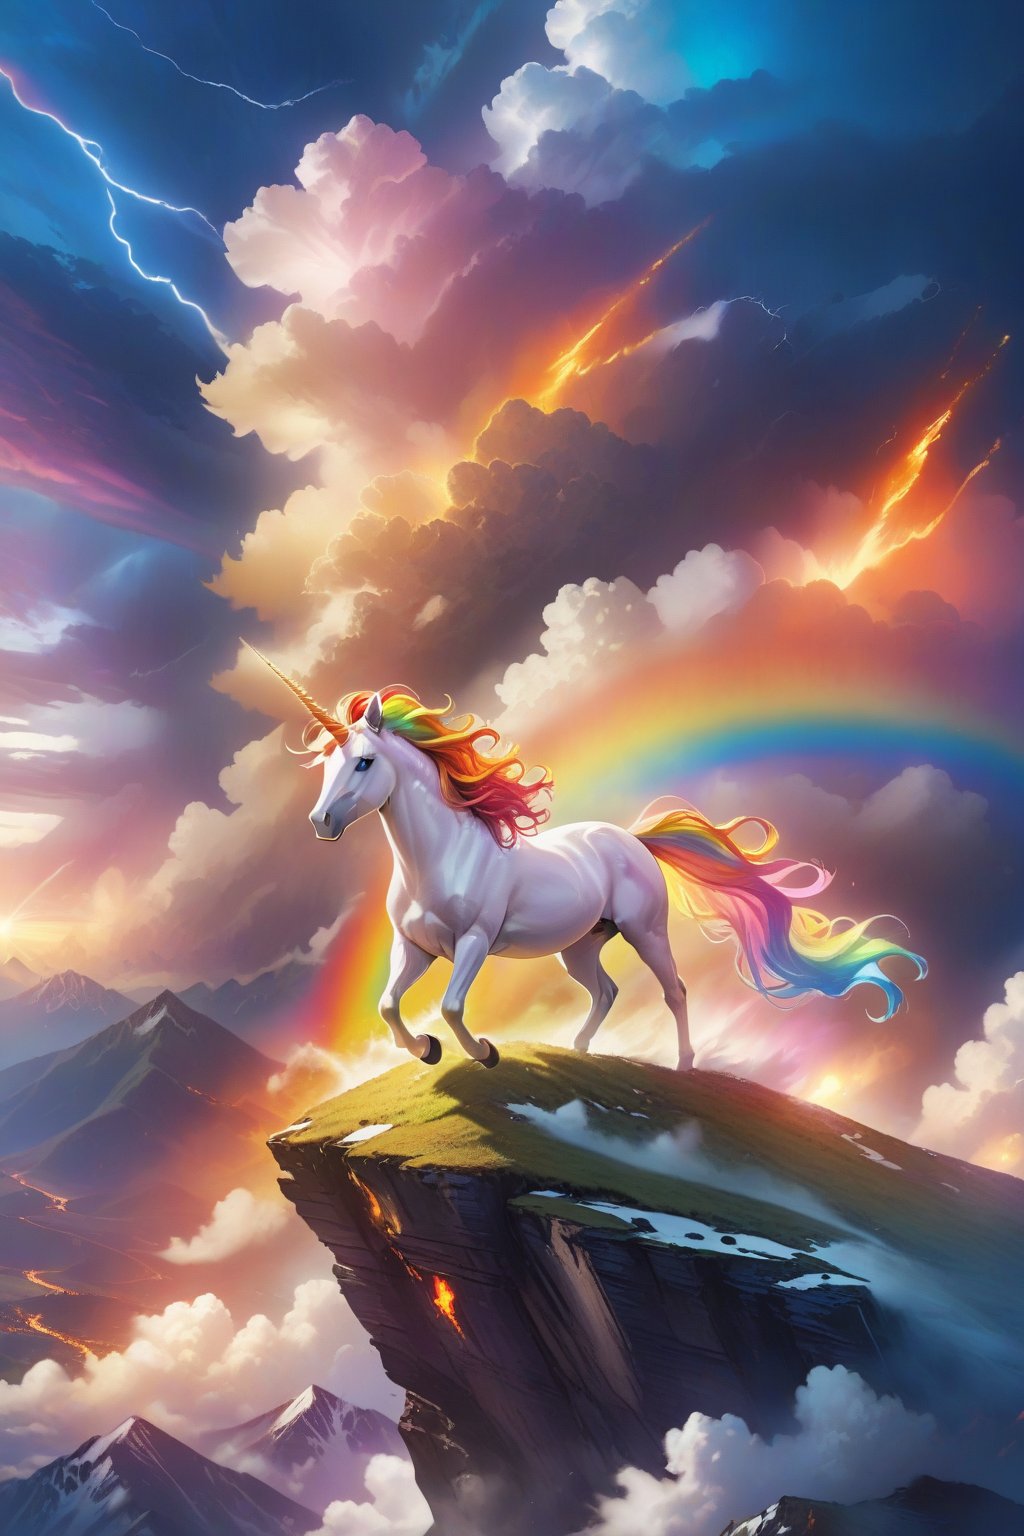 A fierce rainbow unicorn with a fiery mane and glowing eyes, standing atop a mountain peak as a storm rages in the background.